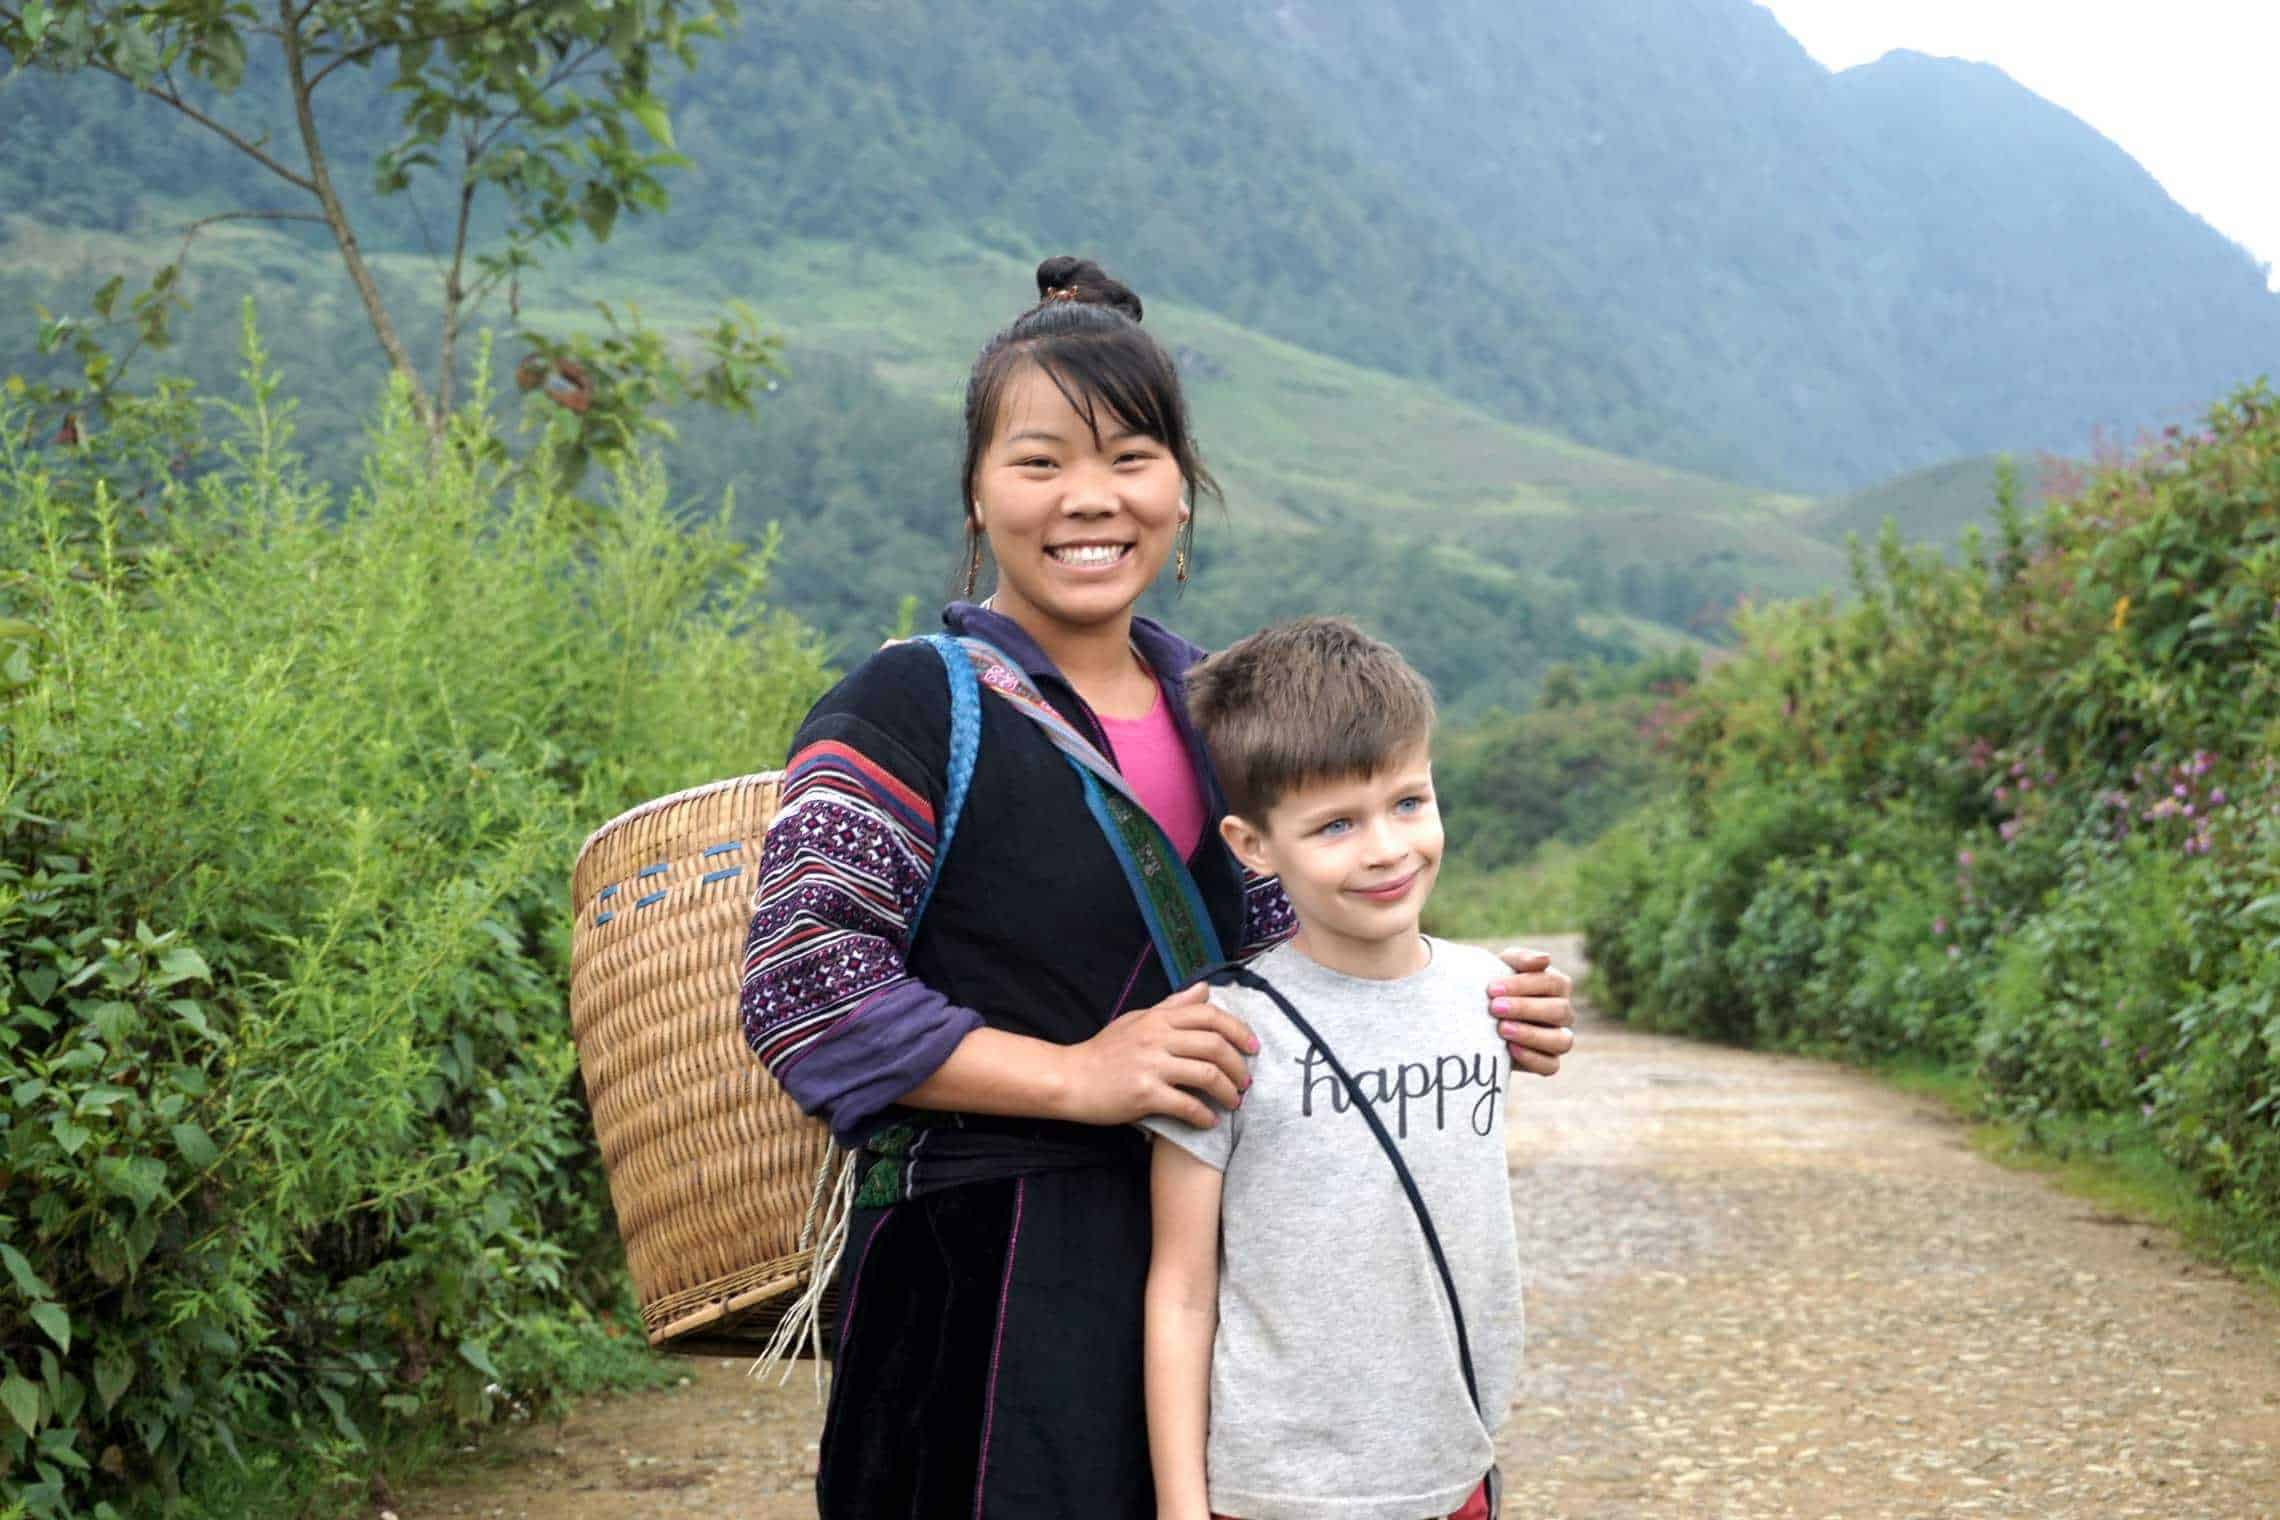 Ethnic villager in Vietnam posing with a foreign child